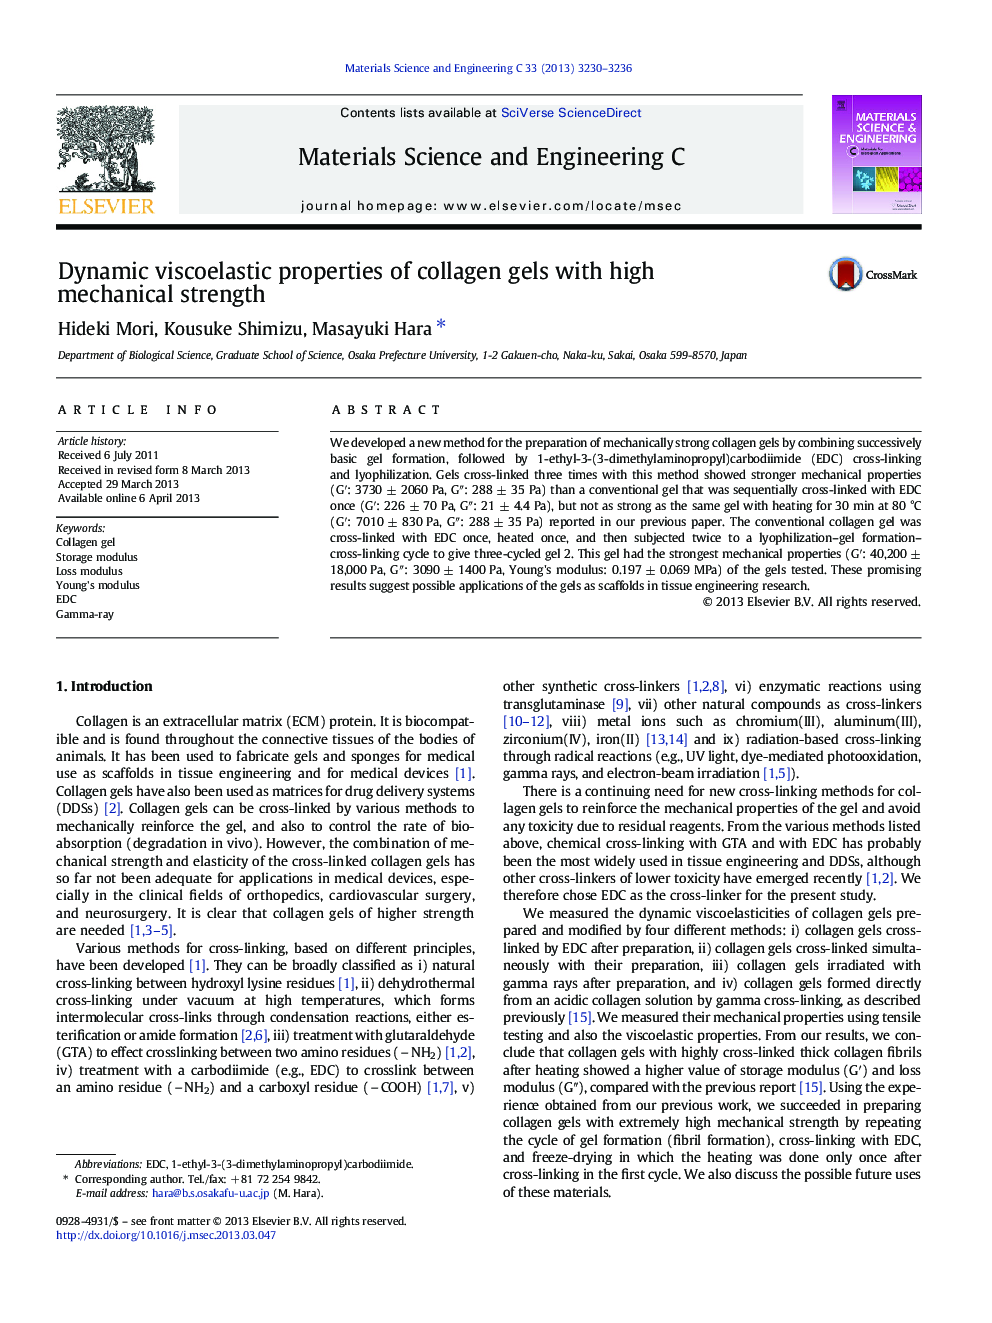 Dynamic viscoelastic properties of collagen gels with high mechanical strength